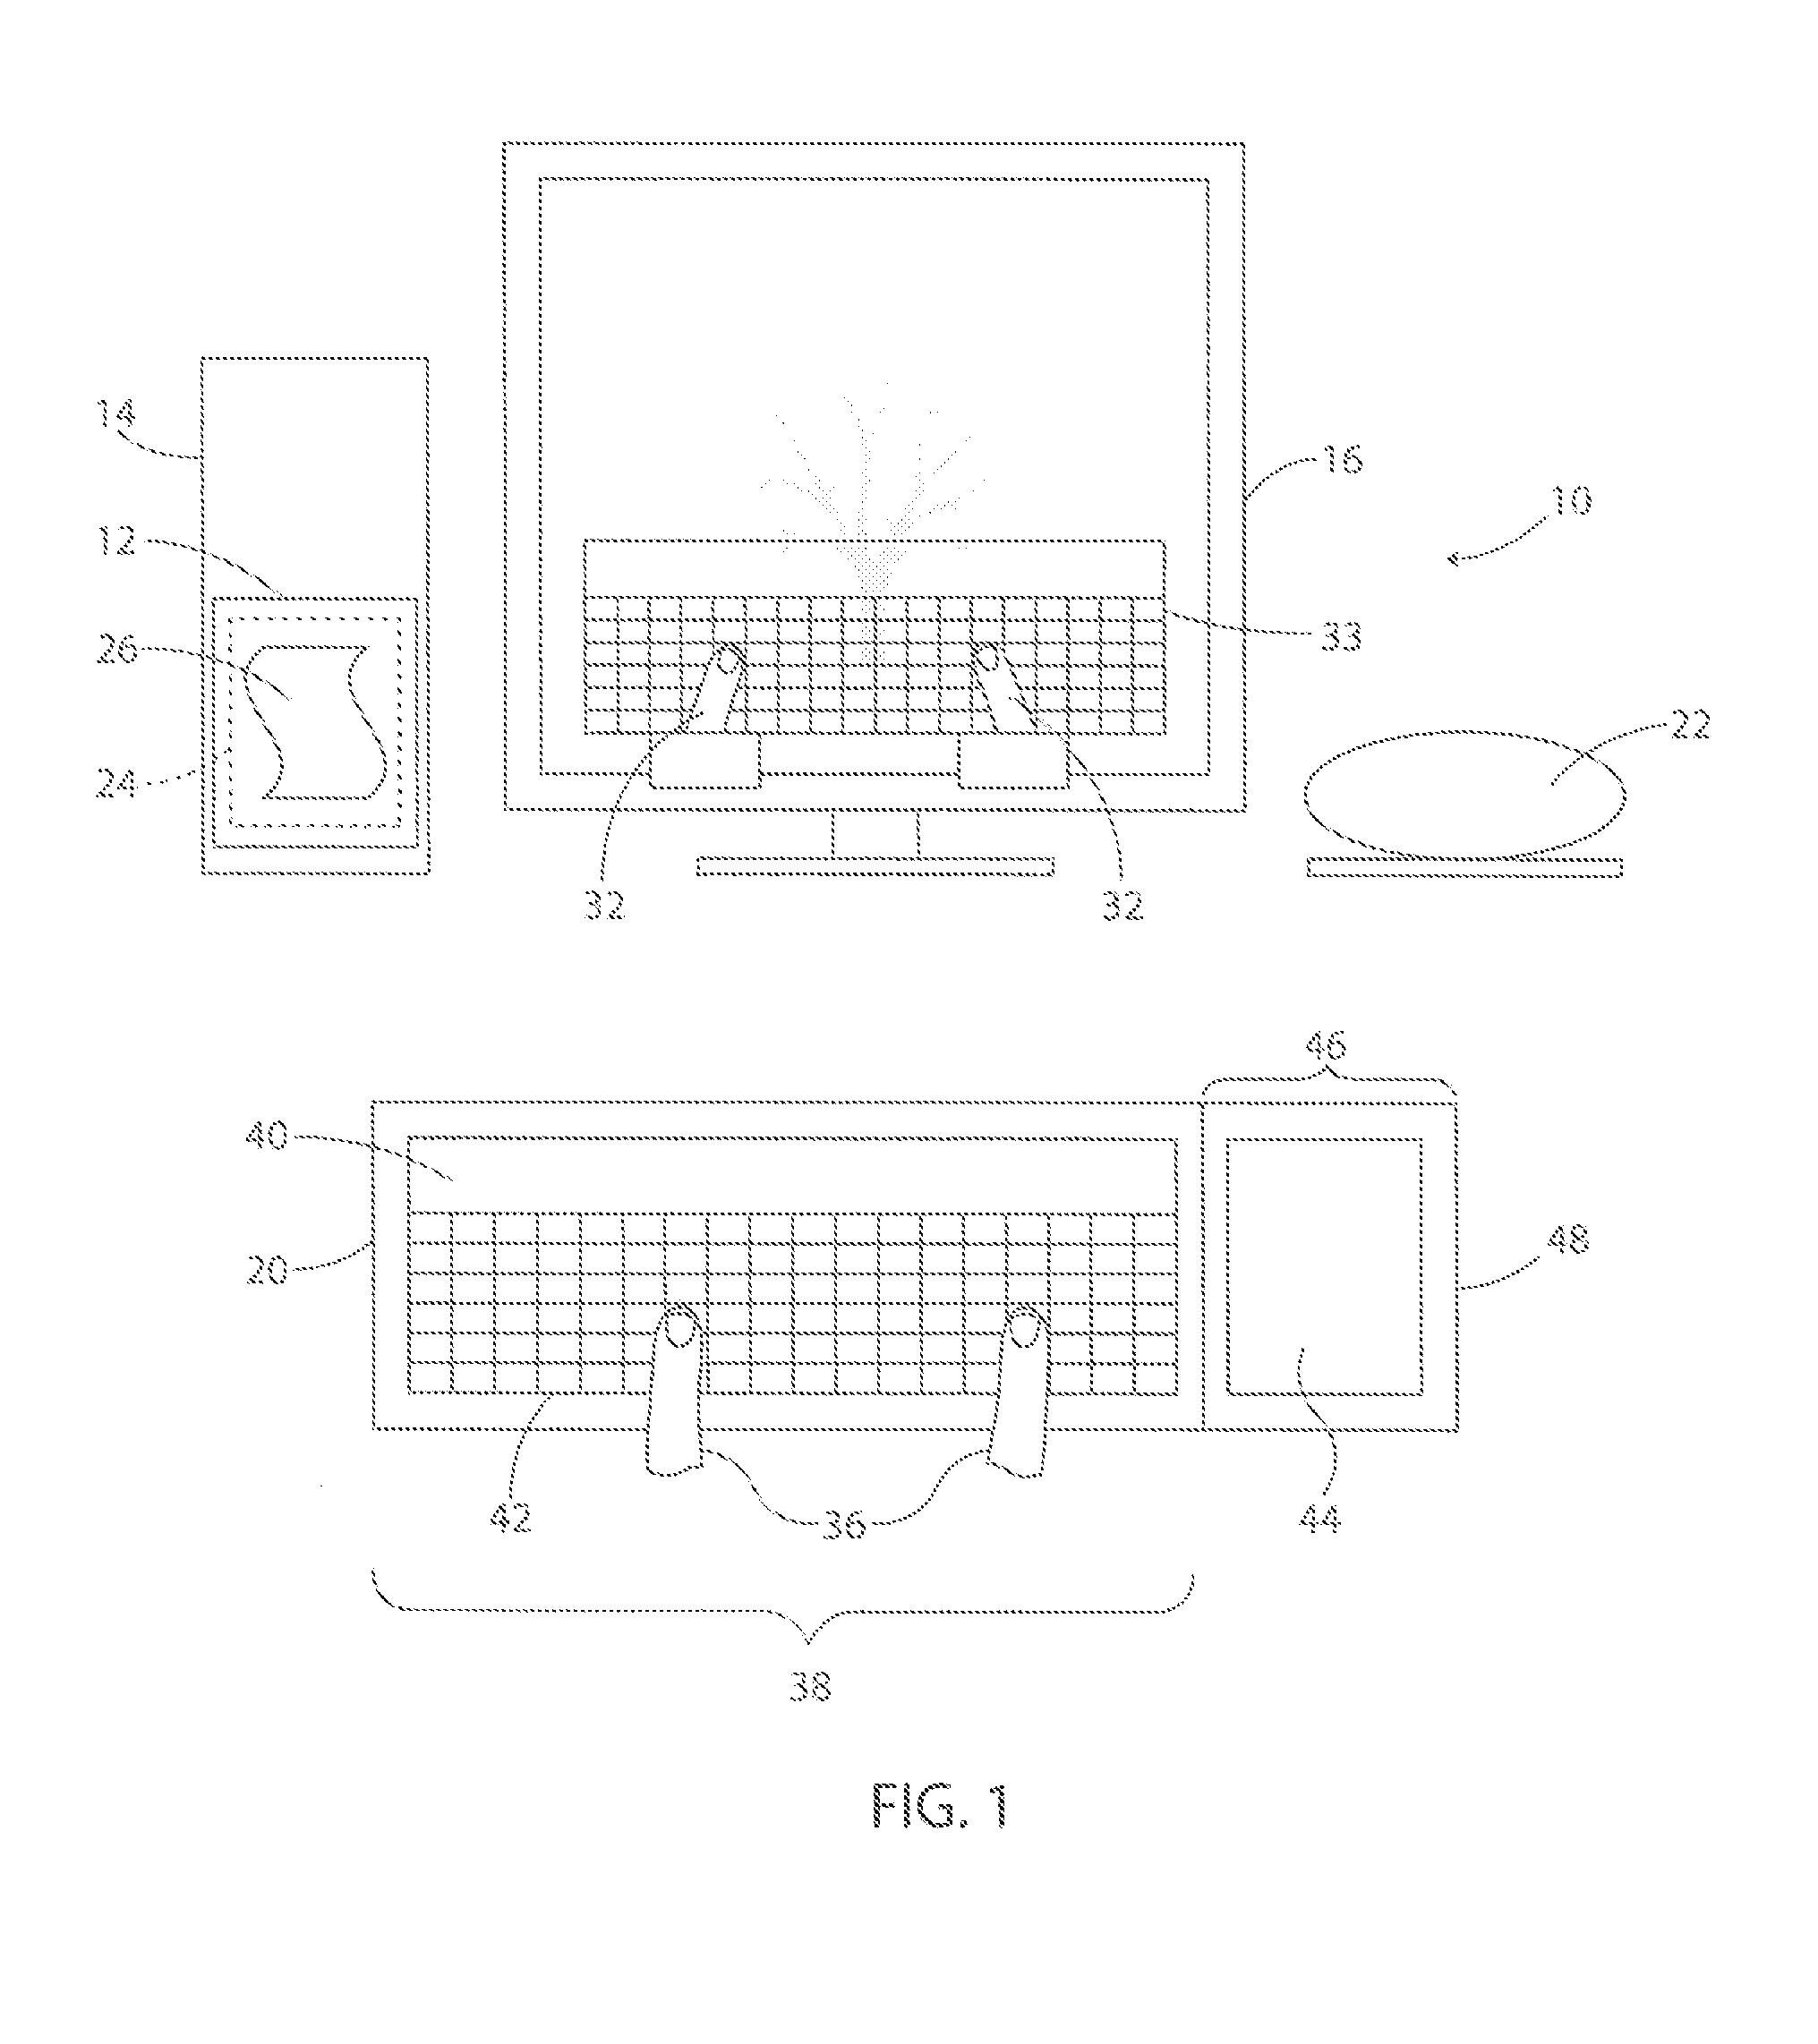 Control method for a function of a touchpad